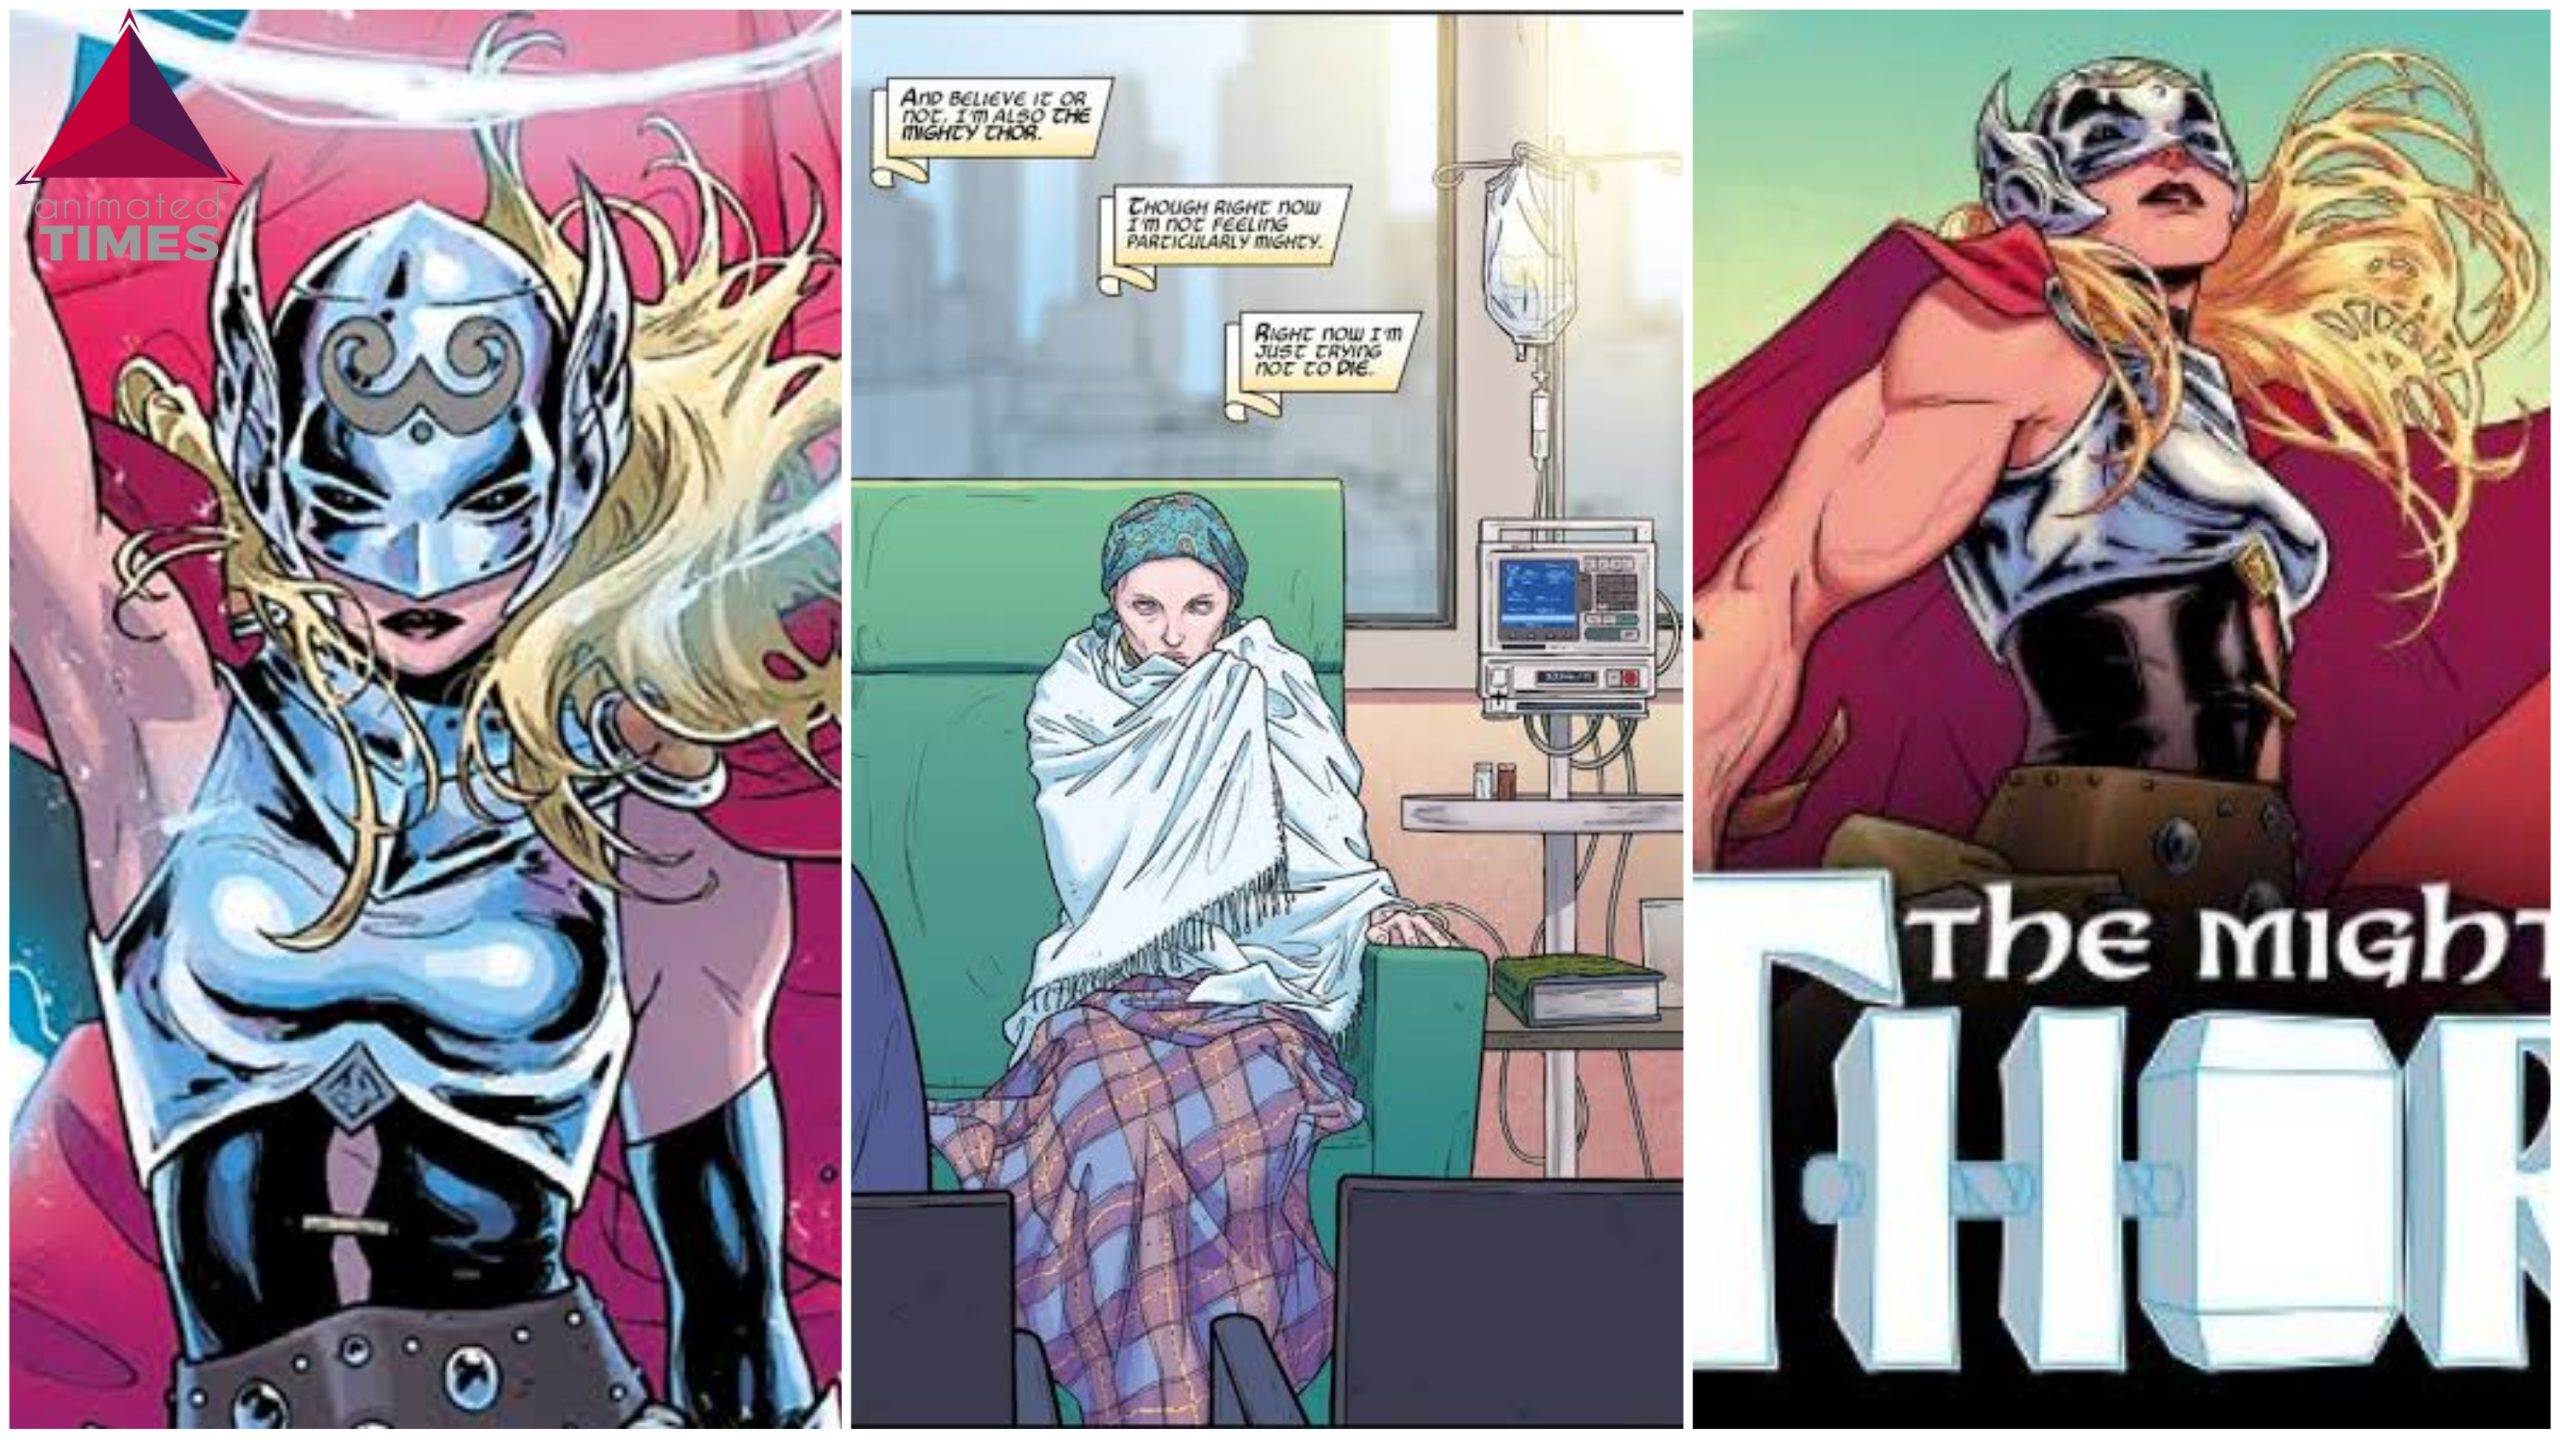 Jane Foster Mighty Thor from the comics